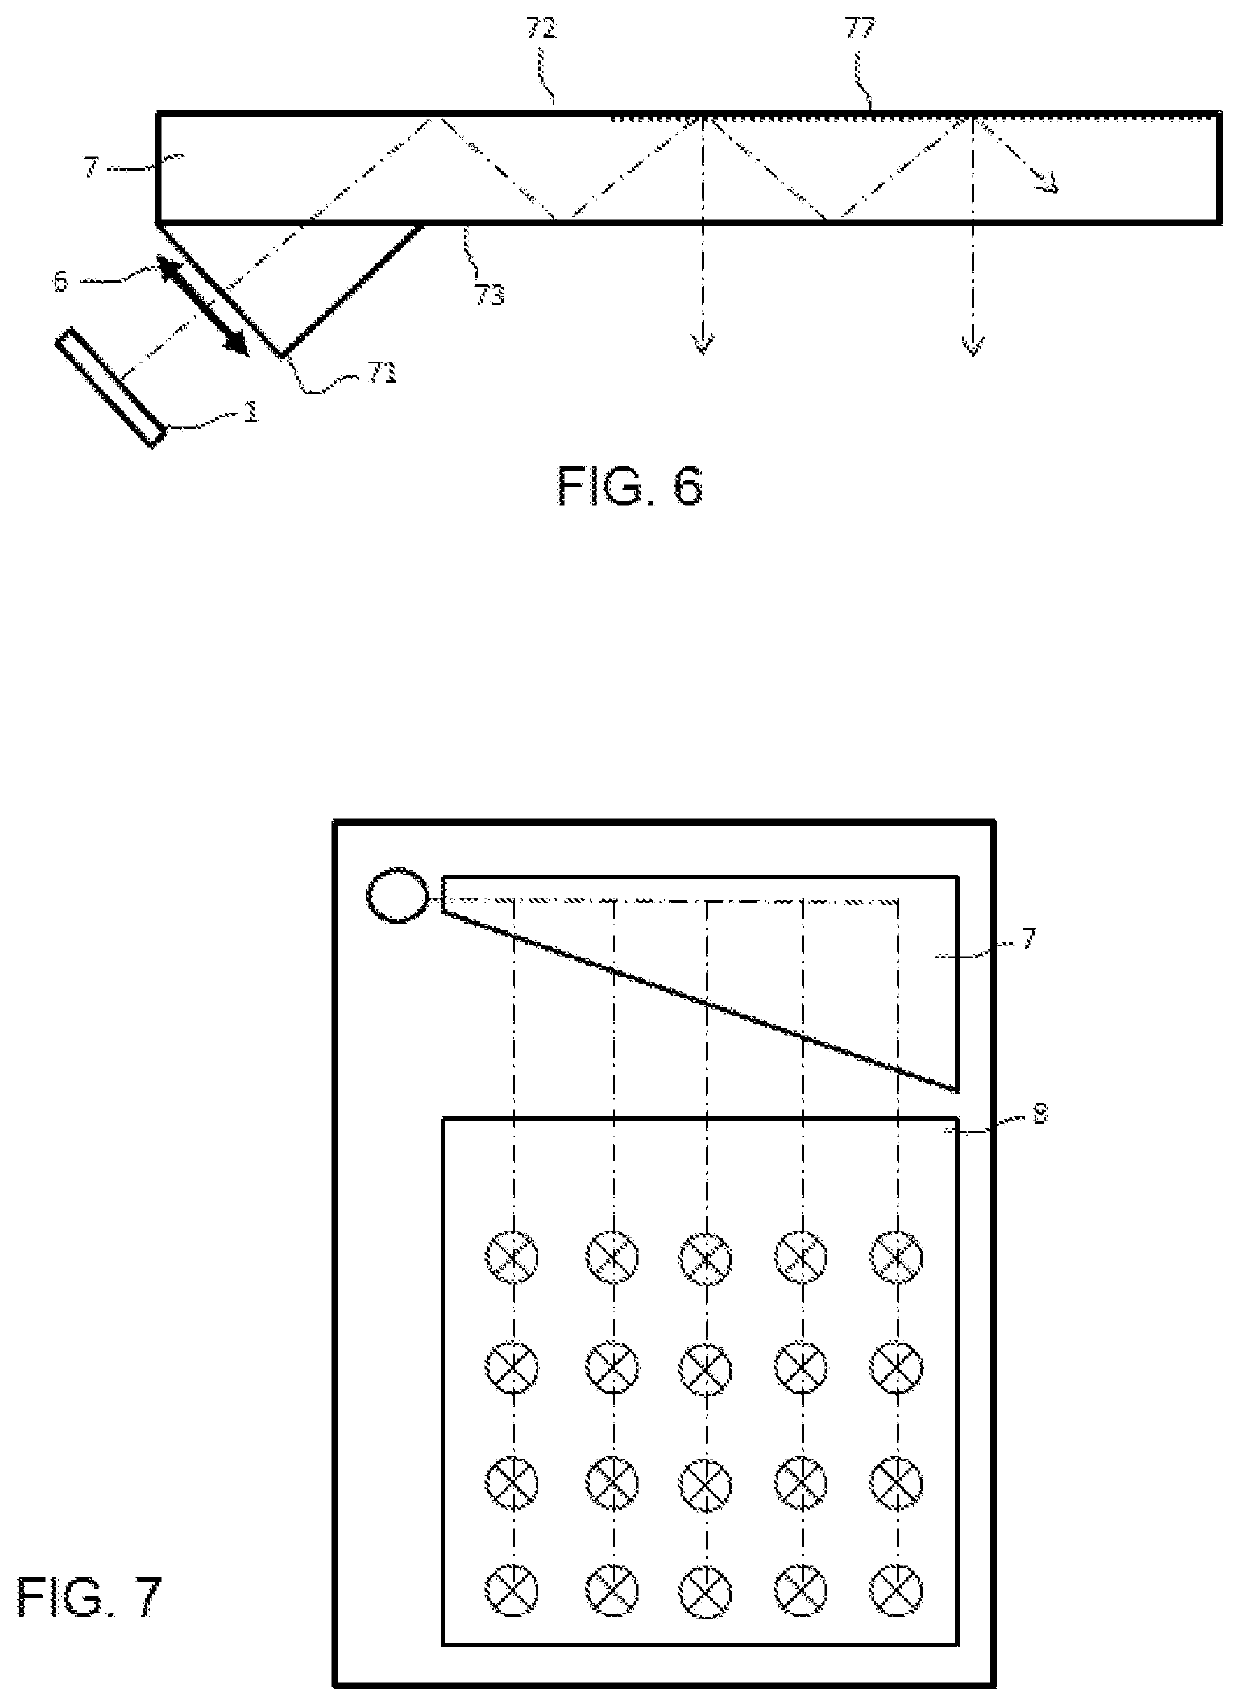 Viewing device comprising a pupil expander including two mirrors